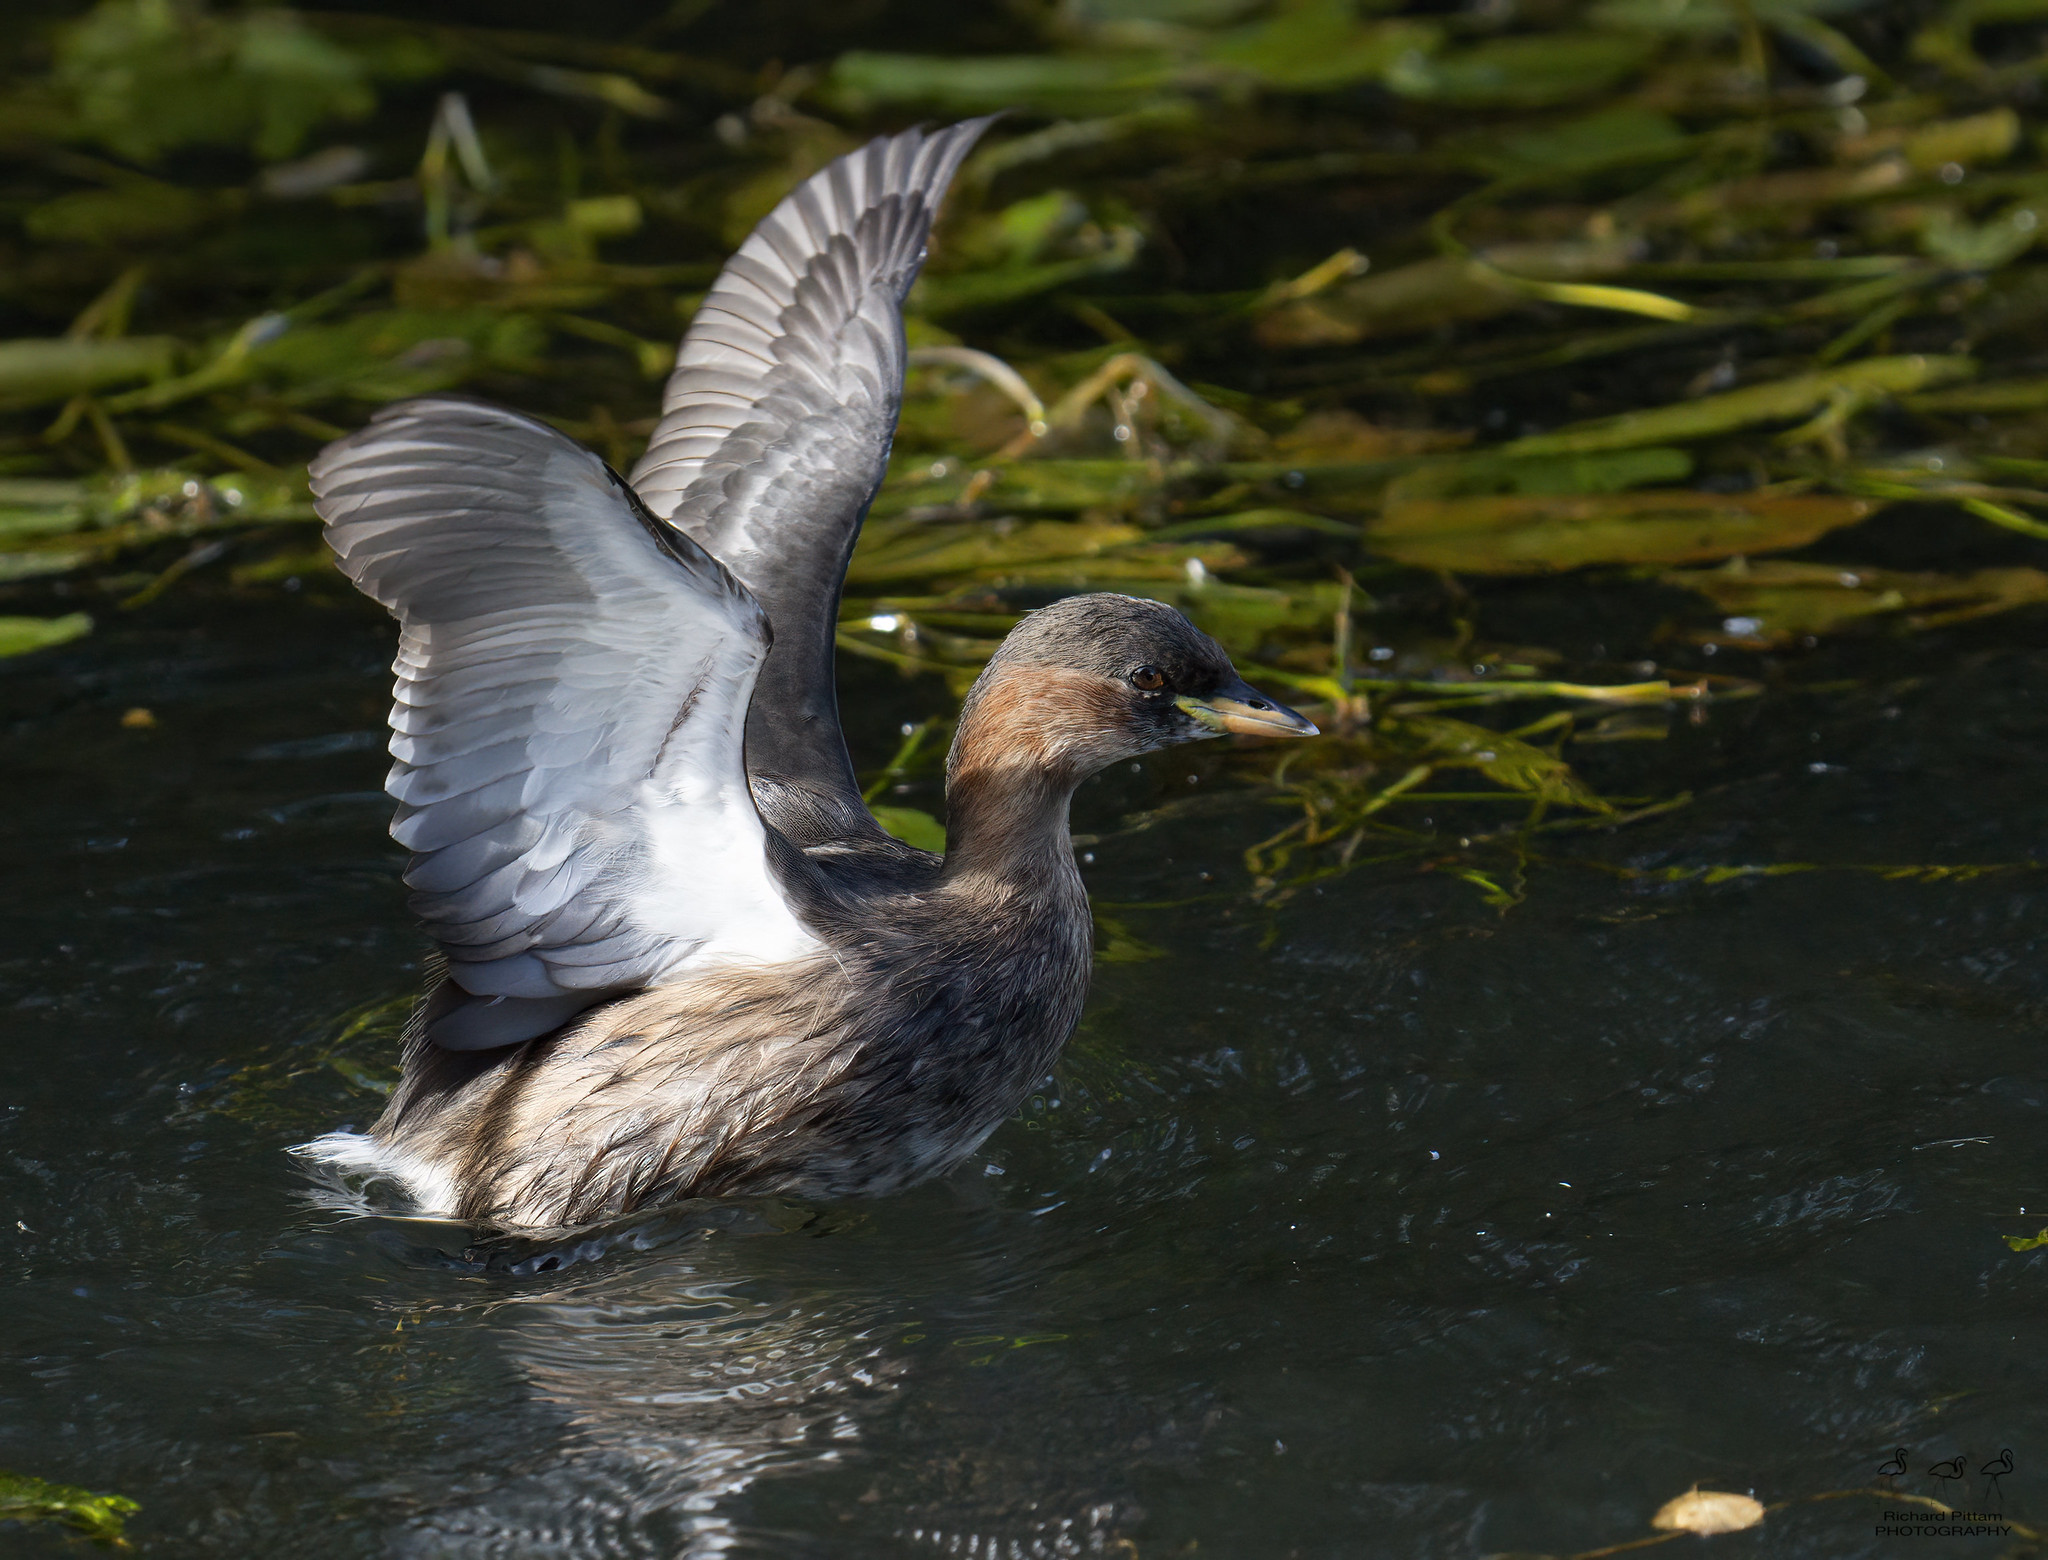 Little Grebe/Dabchick - Autumn colours and high ISOs